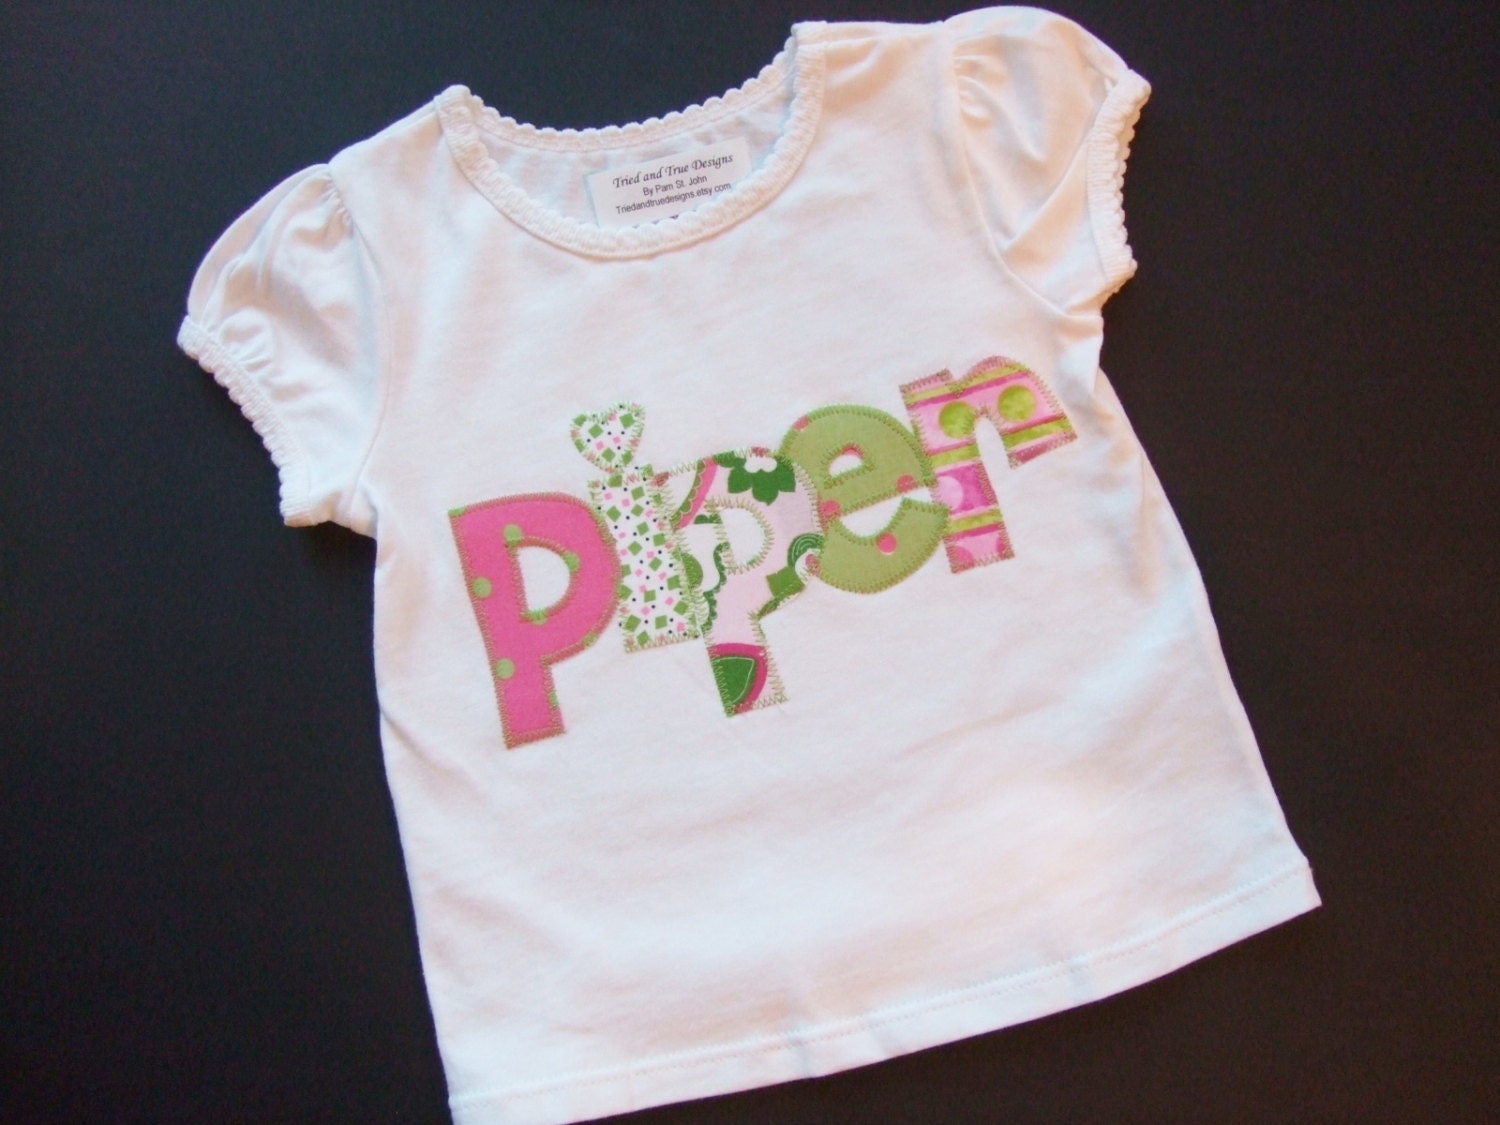 Personalized appliqued t-shirt for girl or boy - you choose the color by Tried and True Designs on Etsy - TriedAndTrueDesigns